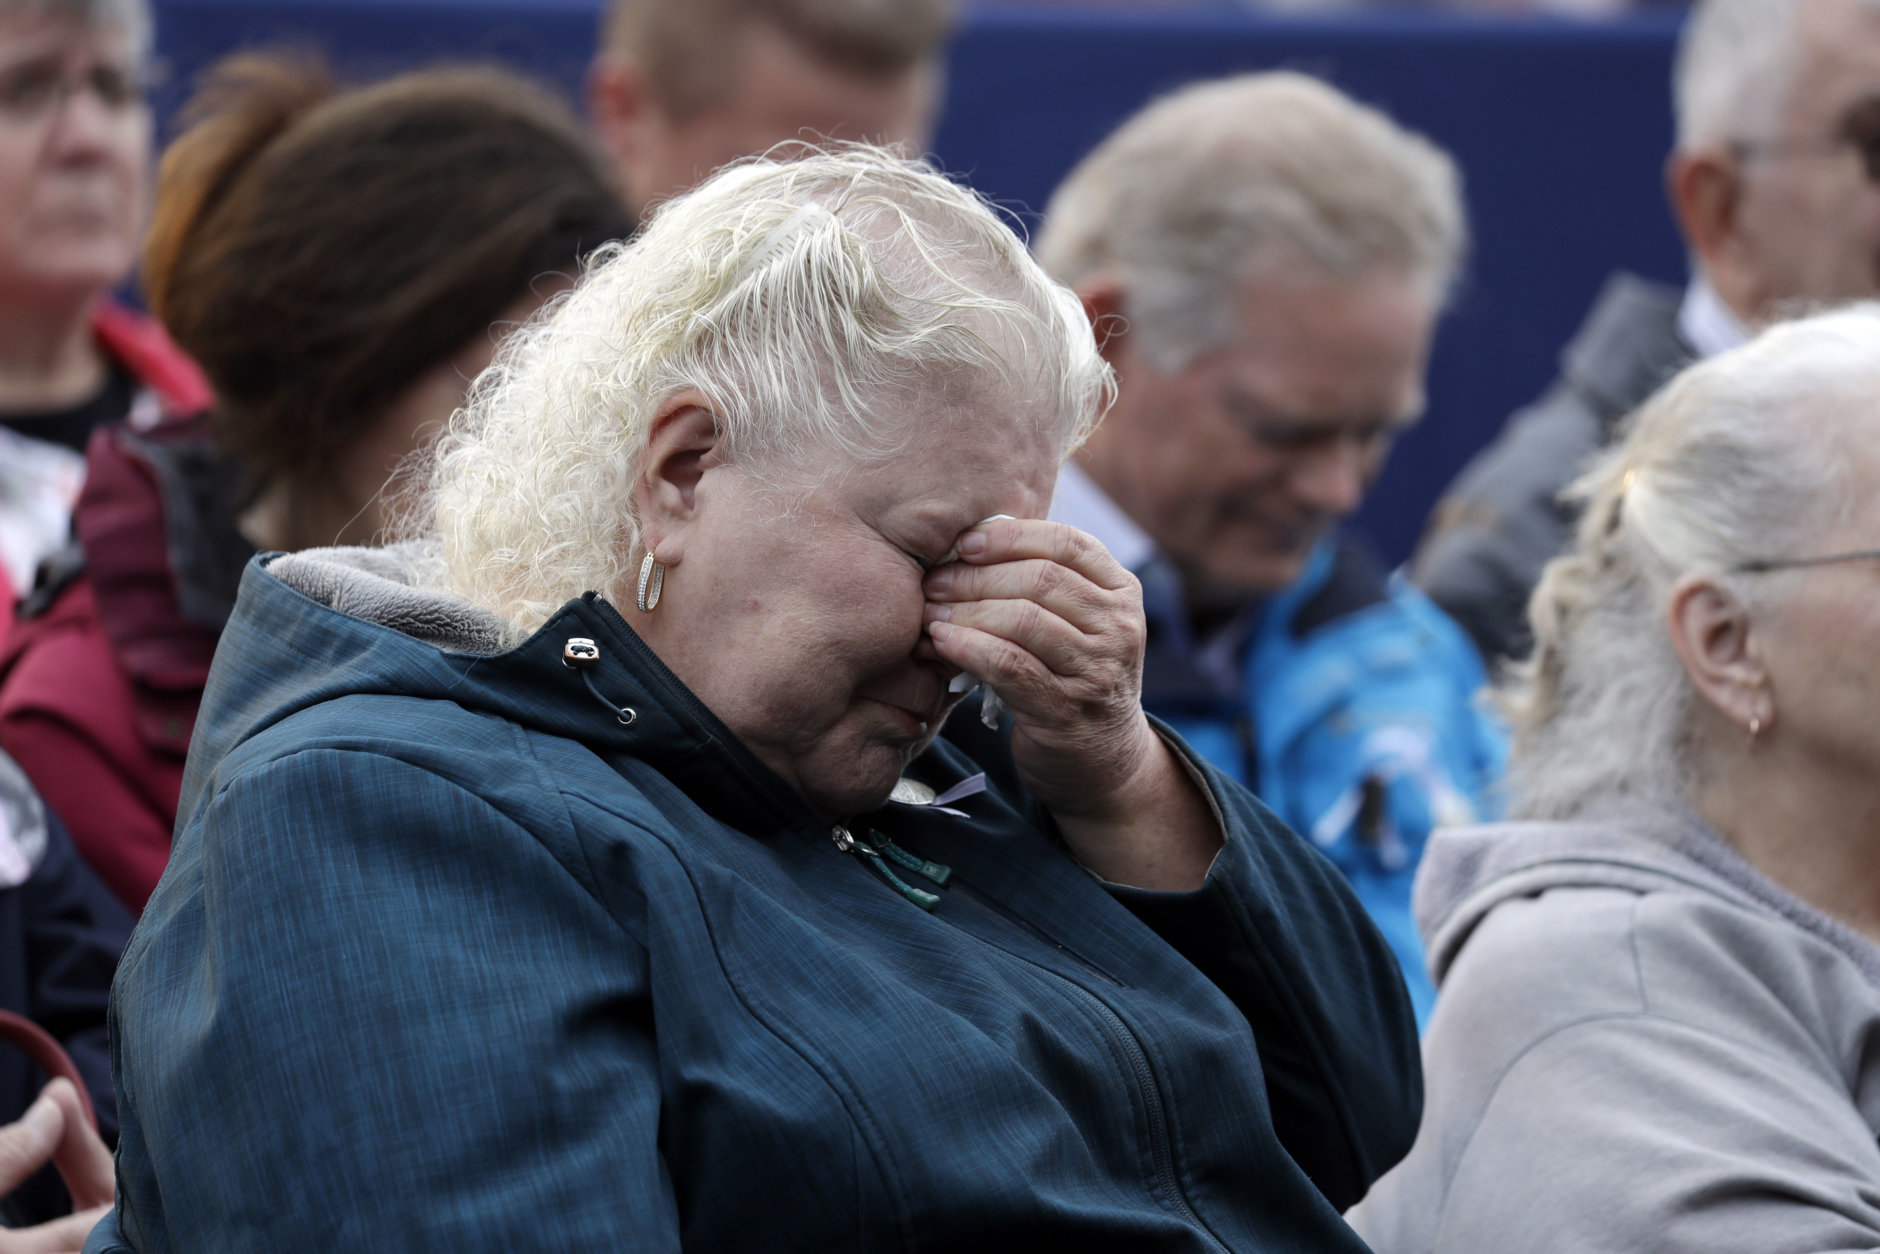 Family members attend the September 11th Flight 93 Memorial Service, Tuesday, Sept. 11, 2018, in Shanksville, Pa. President Donald Trump is marking 17 years since the worst terrorist attack on U.S. soil by visiting the Pennsylvania field that became a Sept. 11 memorial.  (AP Photo/Evan Vucci)